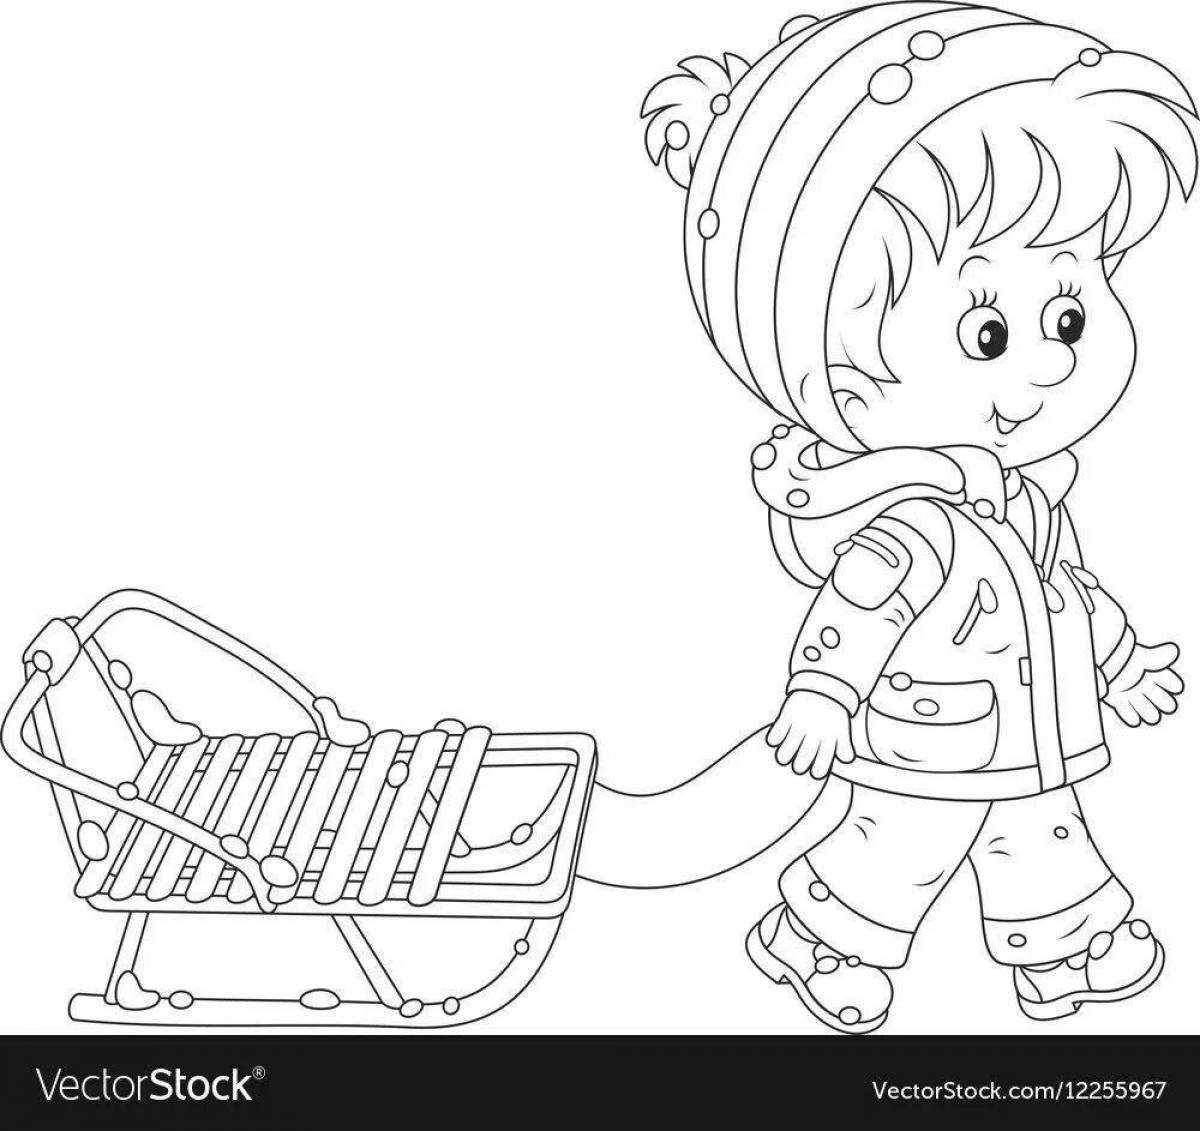 Coloring page of a funny boy on a sled